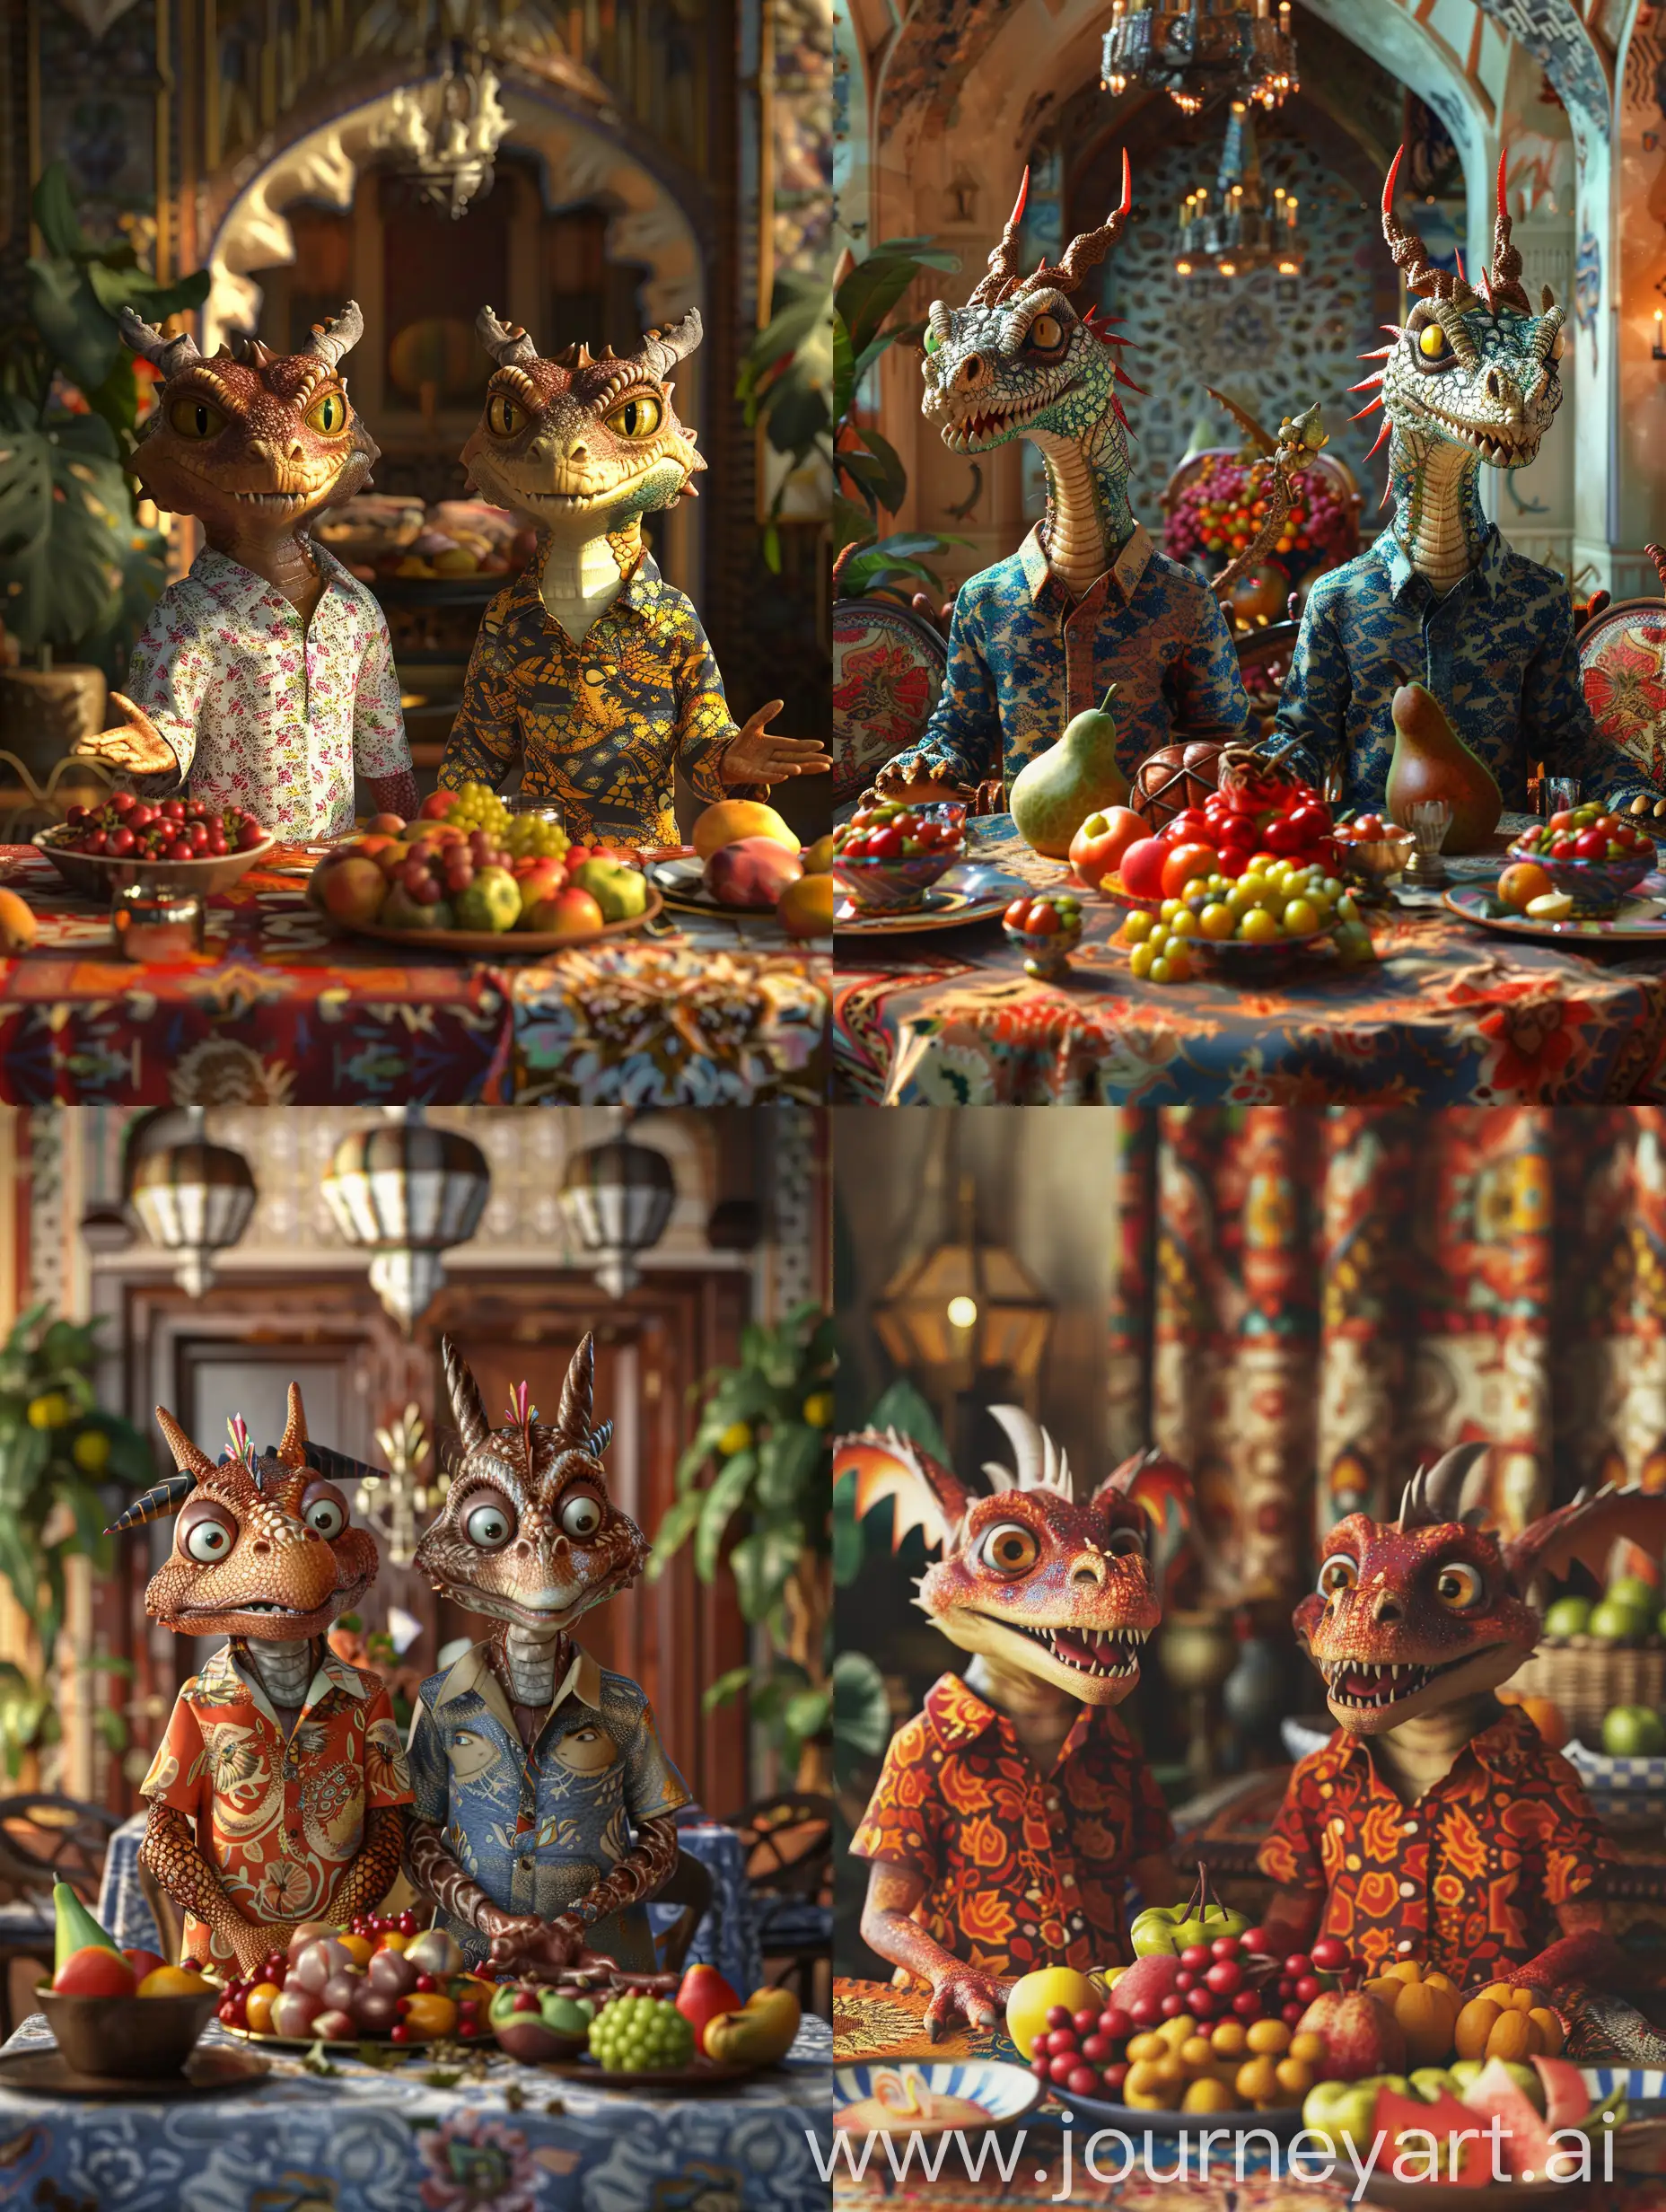 3D dragons wearing shirt from Brand named ADA SPORT,An Iranian family, Haftsin and fruits on the table, Iranian architecture, happy faces, formal clothes, Nowruz celebration, haftseen, iranian new year, charismatic, thief, fantasy ambiance, intricate details, cinematic lighting, ultra quality, wallpaper 8k, friendly face, good looking eyes, ((good hands))